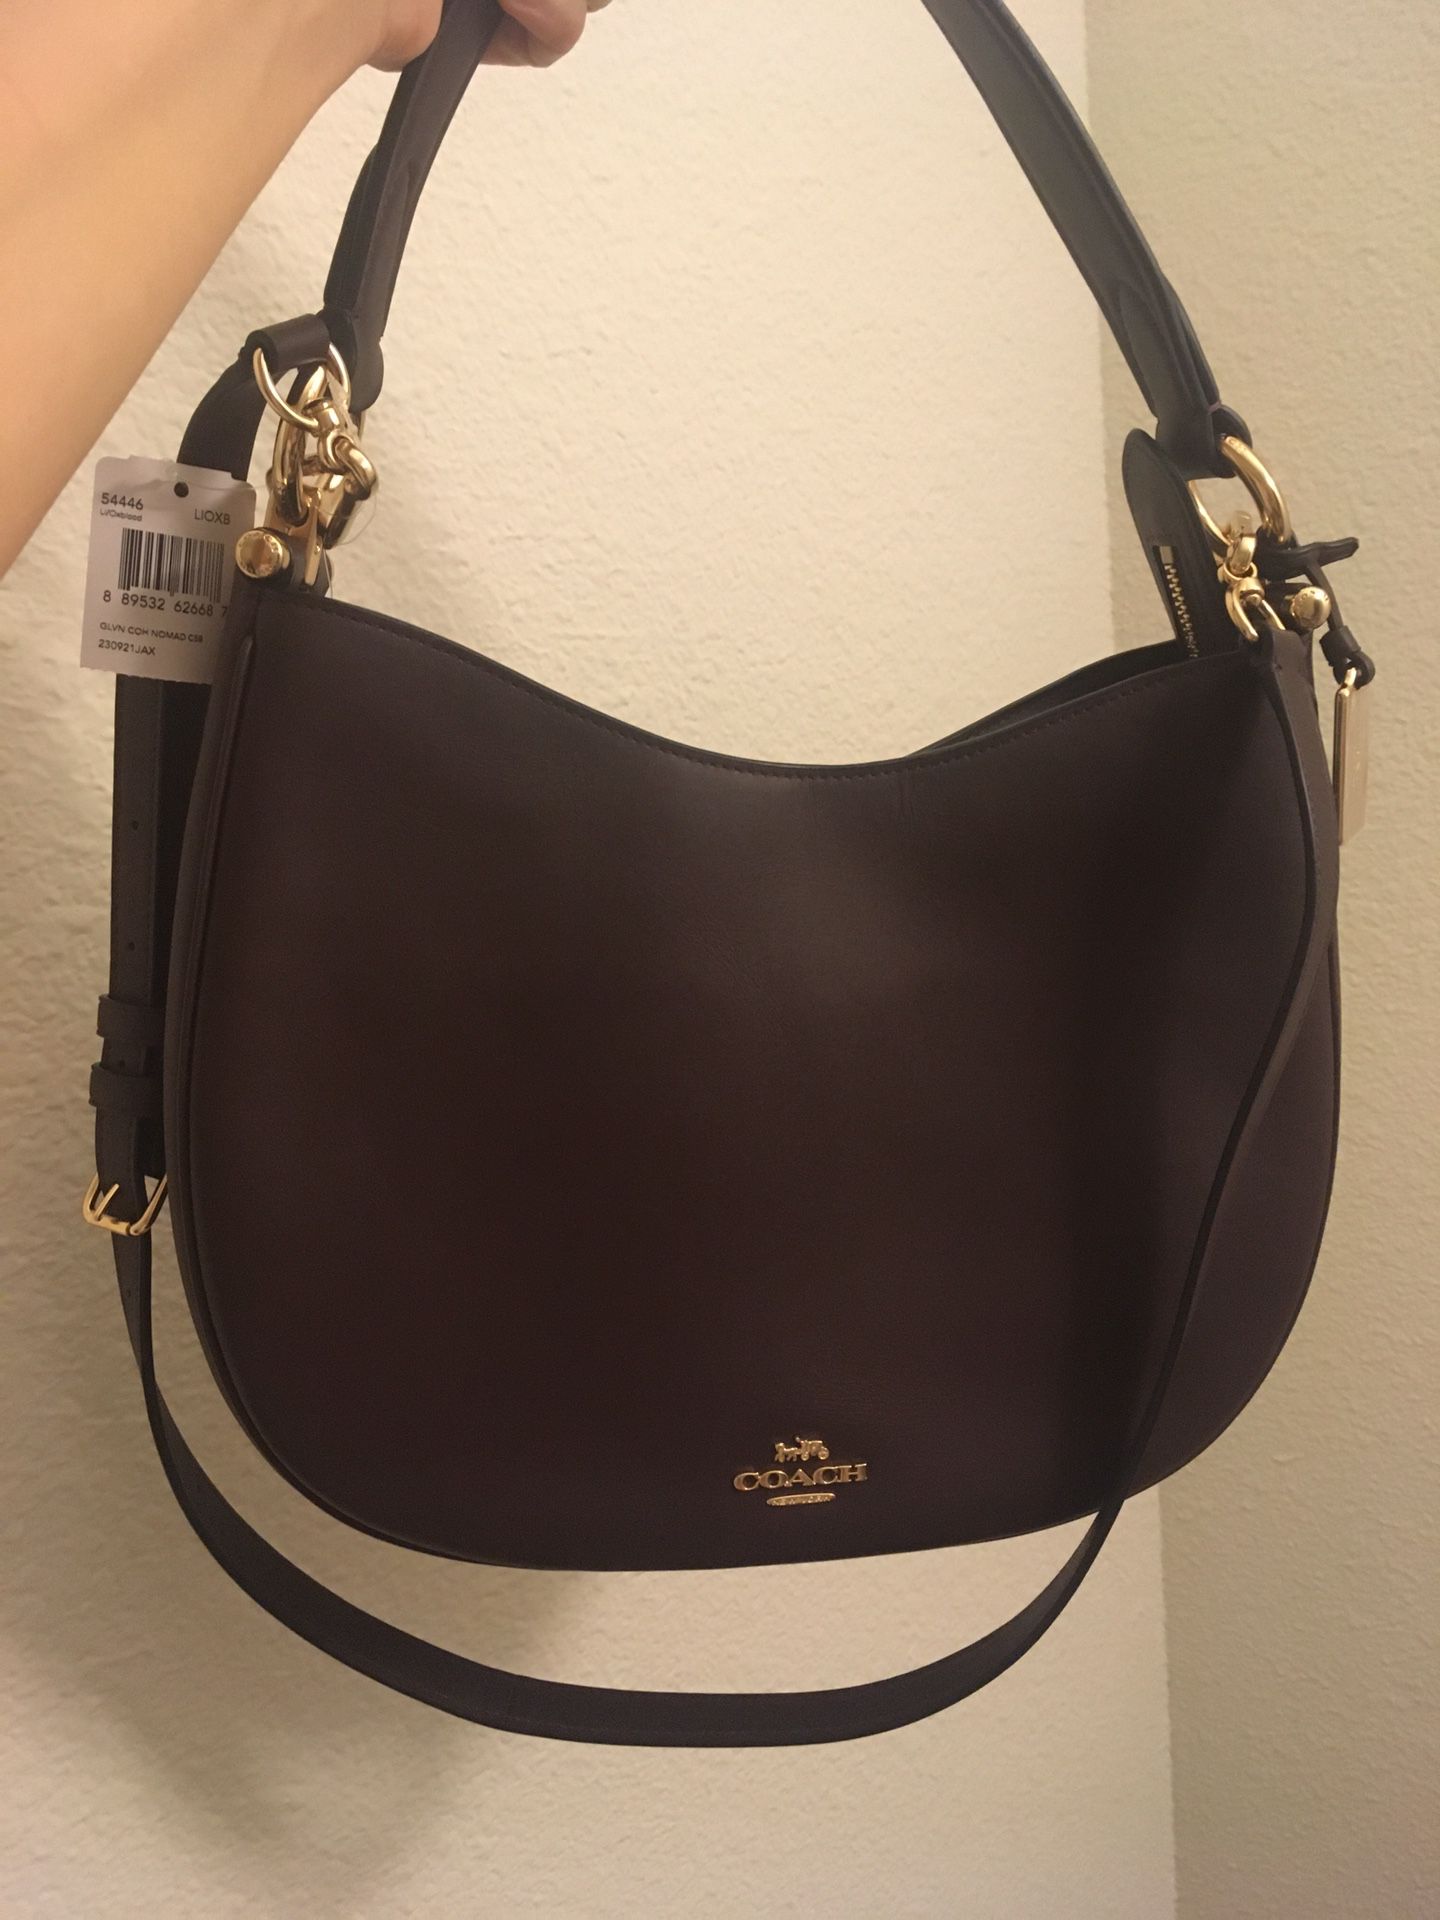 Authentic and brand new original COACH Luxury hand bag with tag ( Original price is $429+tax)